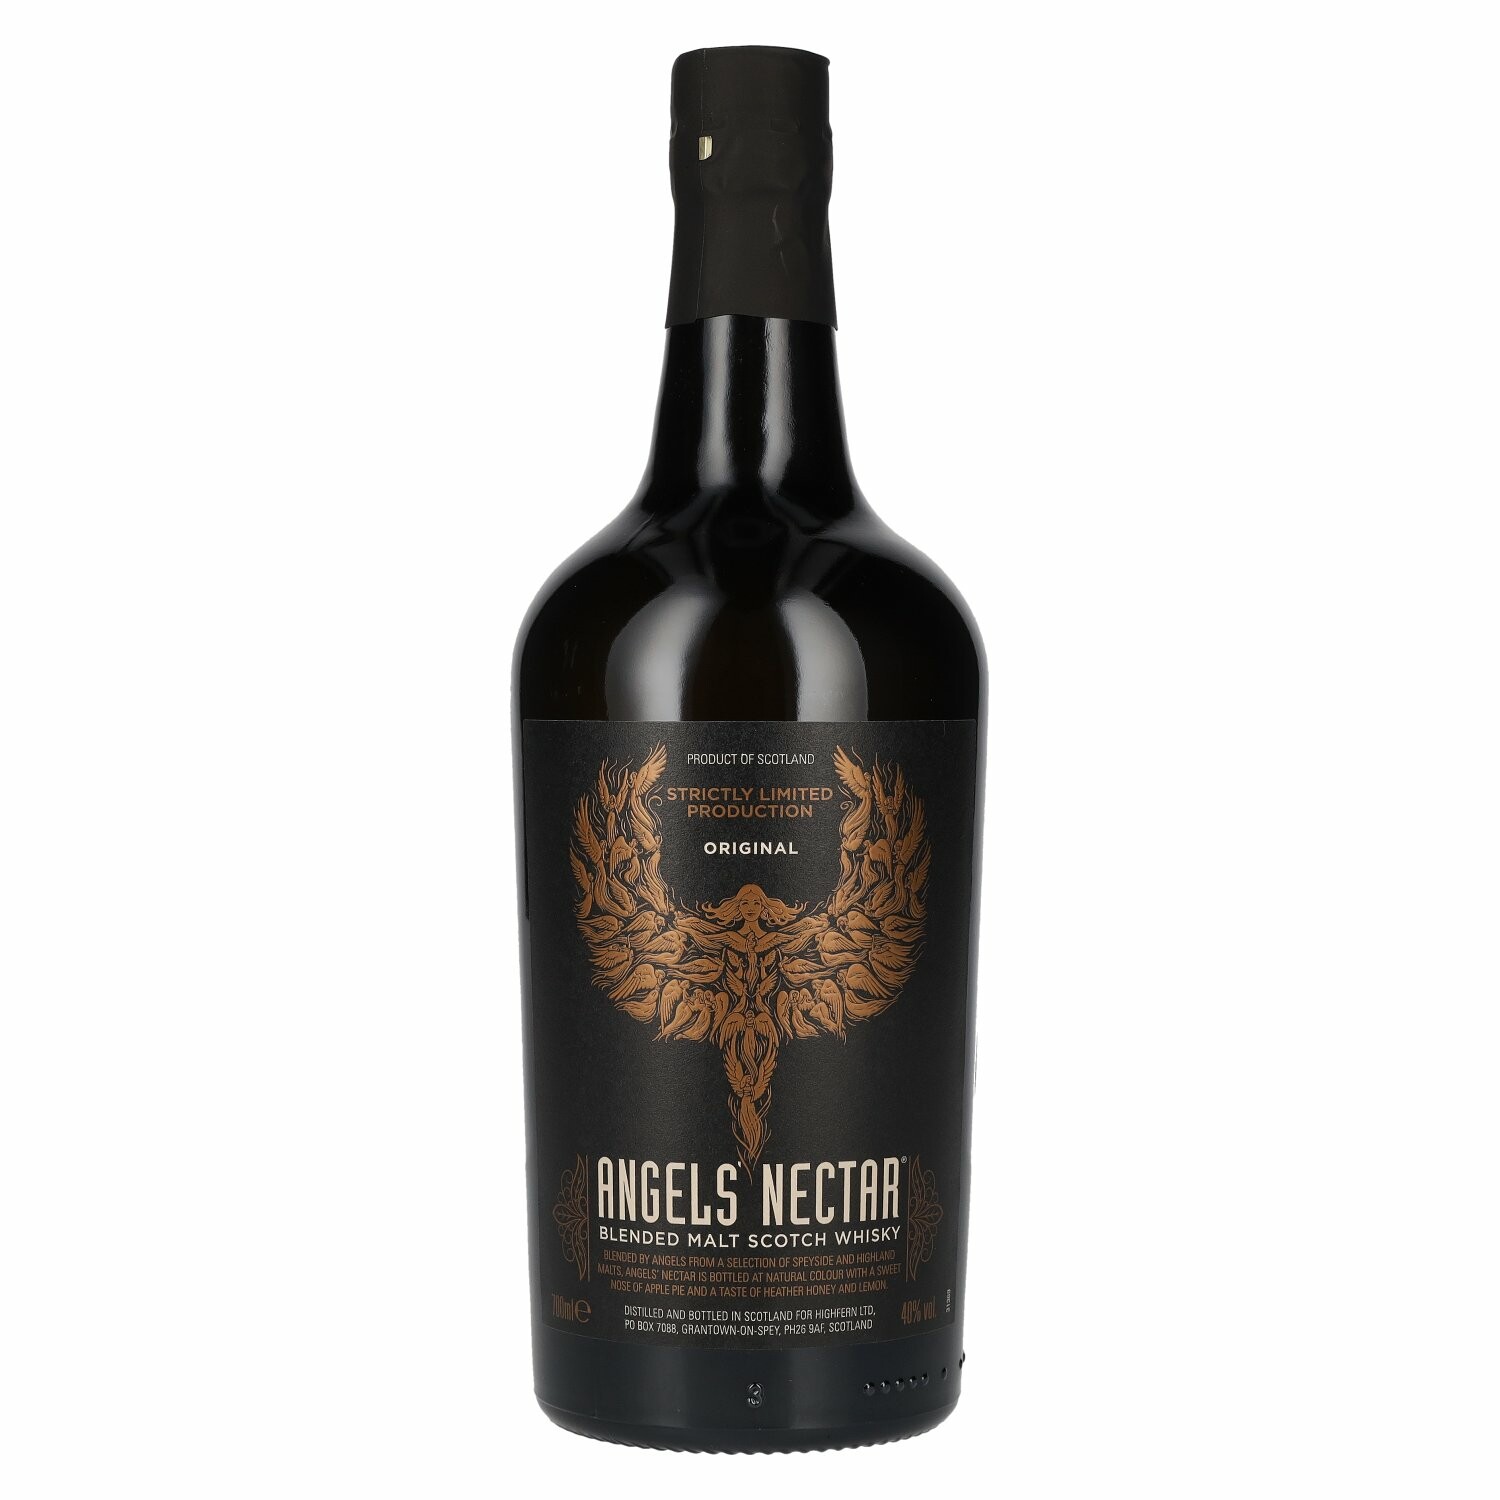 Angels' Nectar 5 Years Old Blended Malt Scotch Whisky 40% Vol. 0,7l